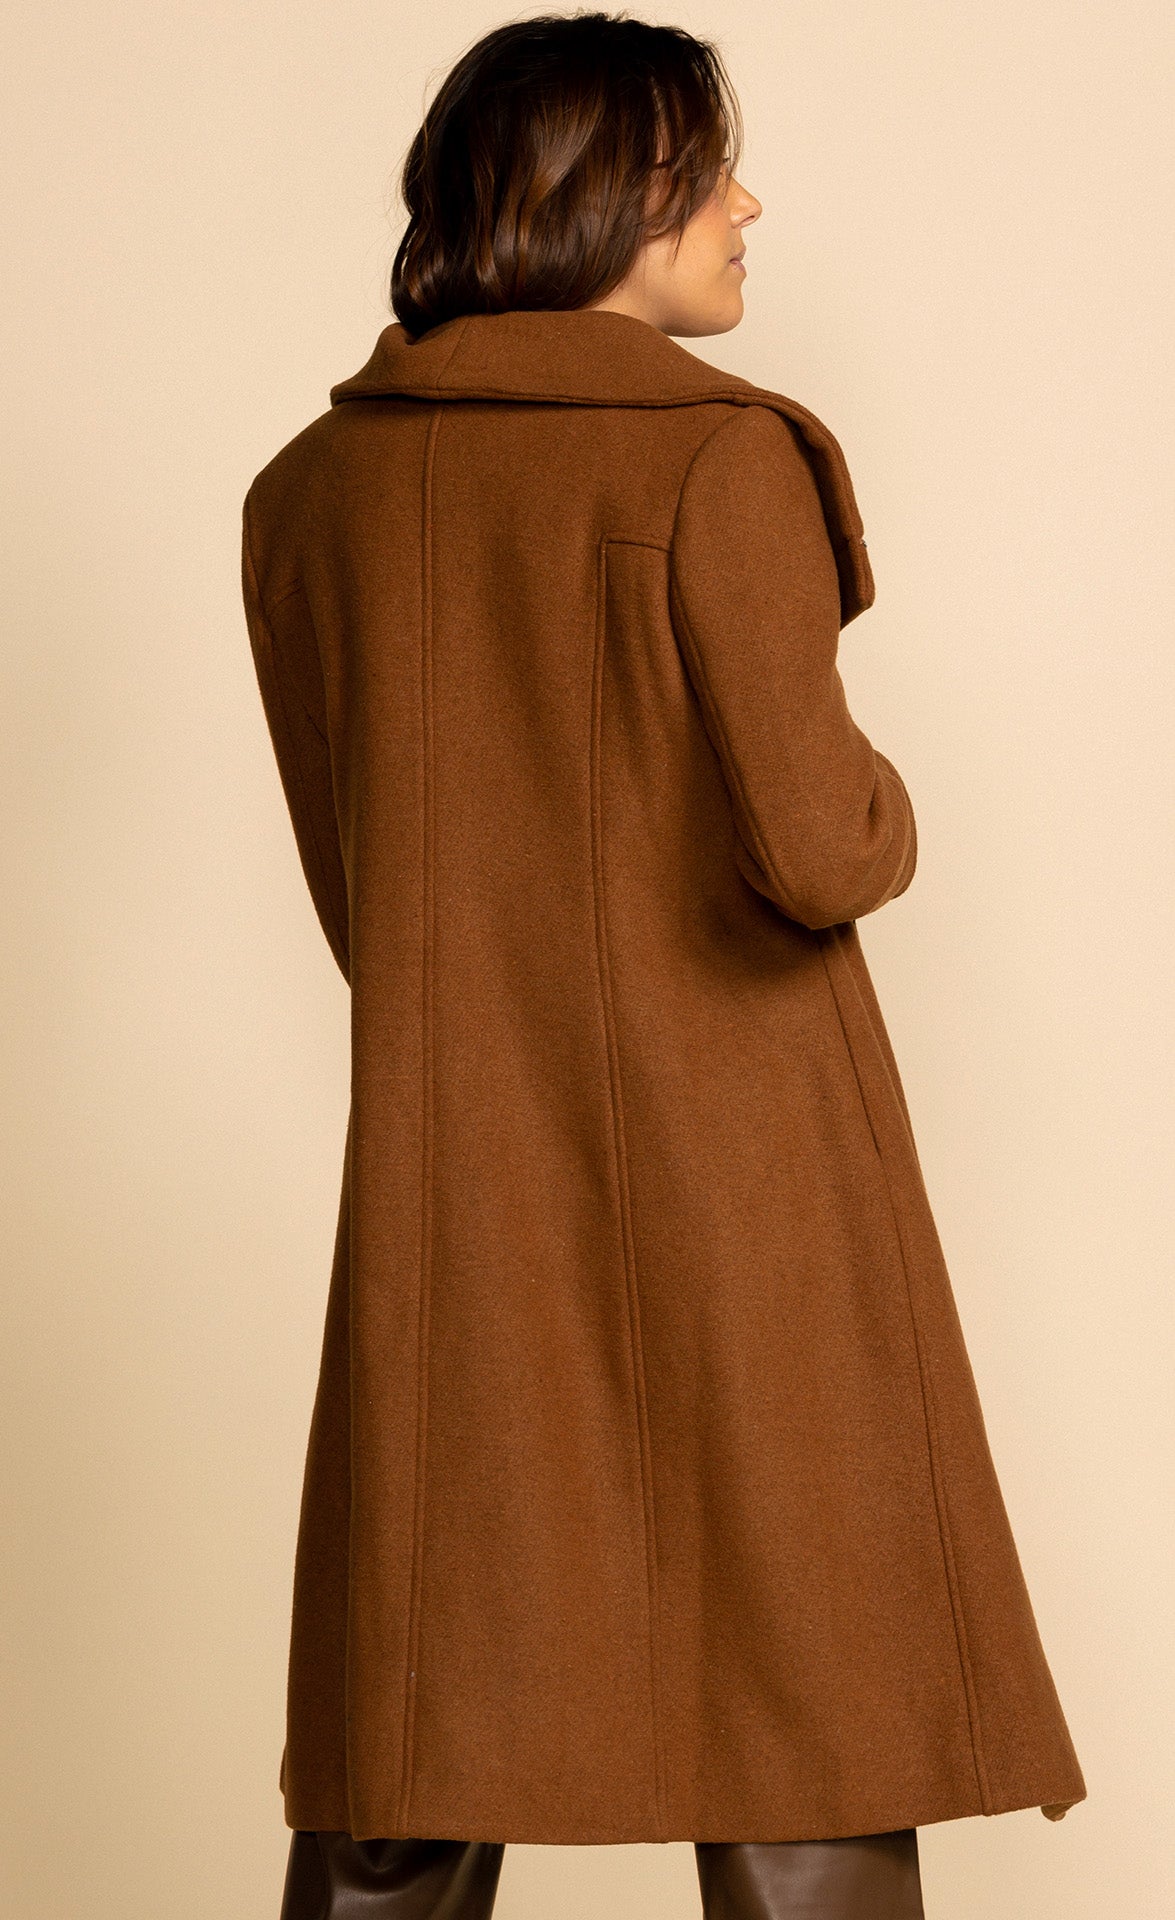 Narla Teddy Coat Camel - Pink Martini Collection